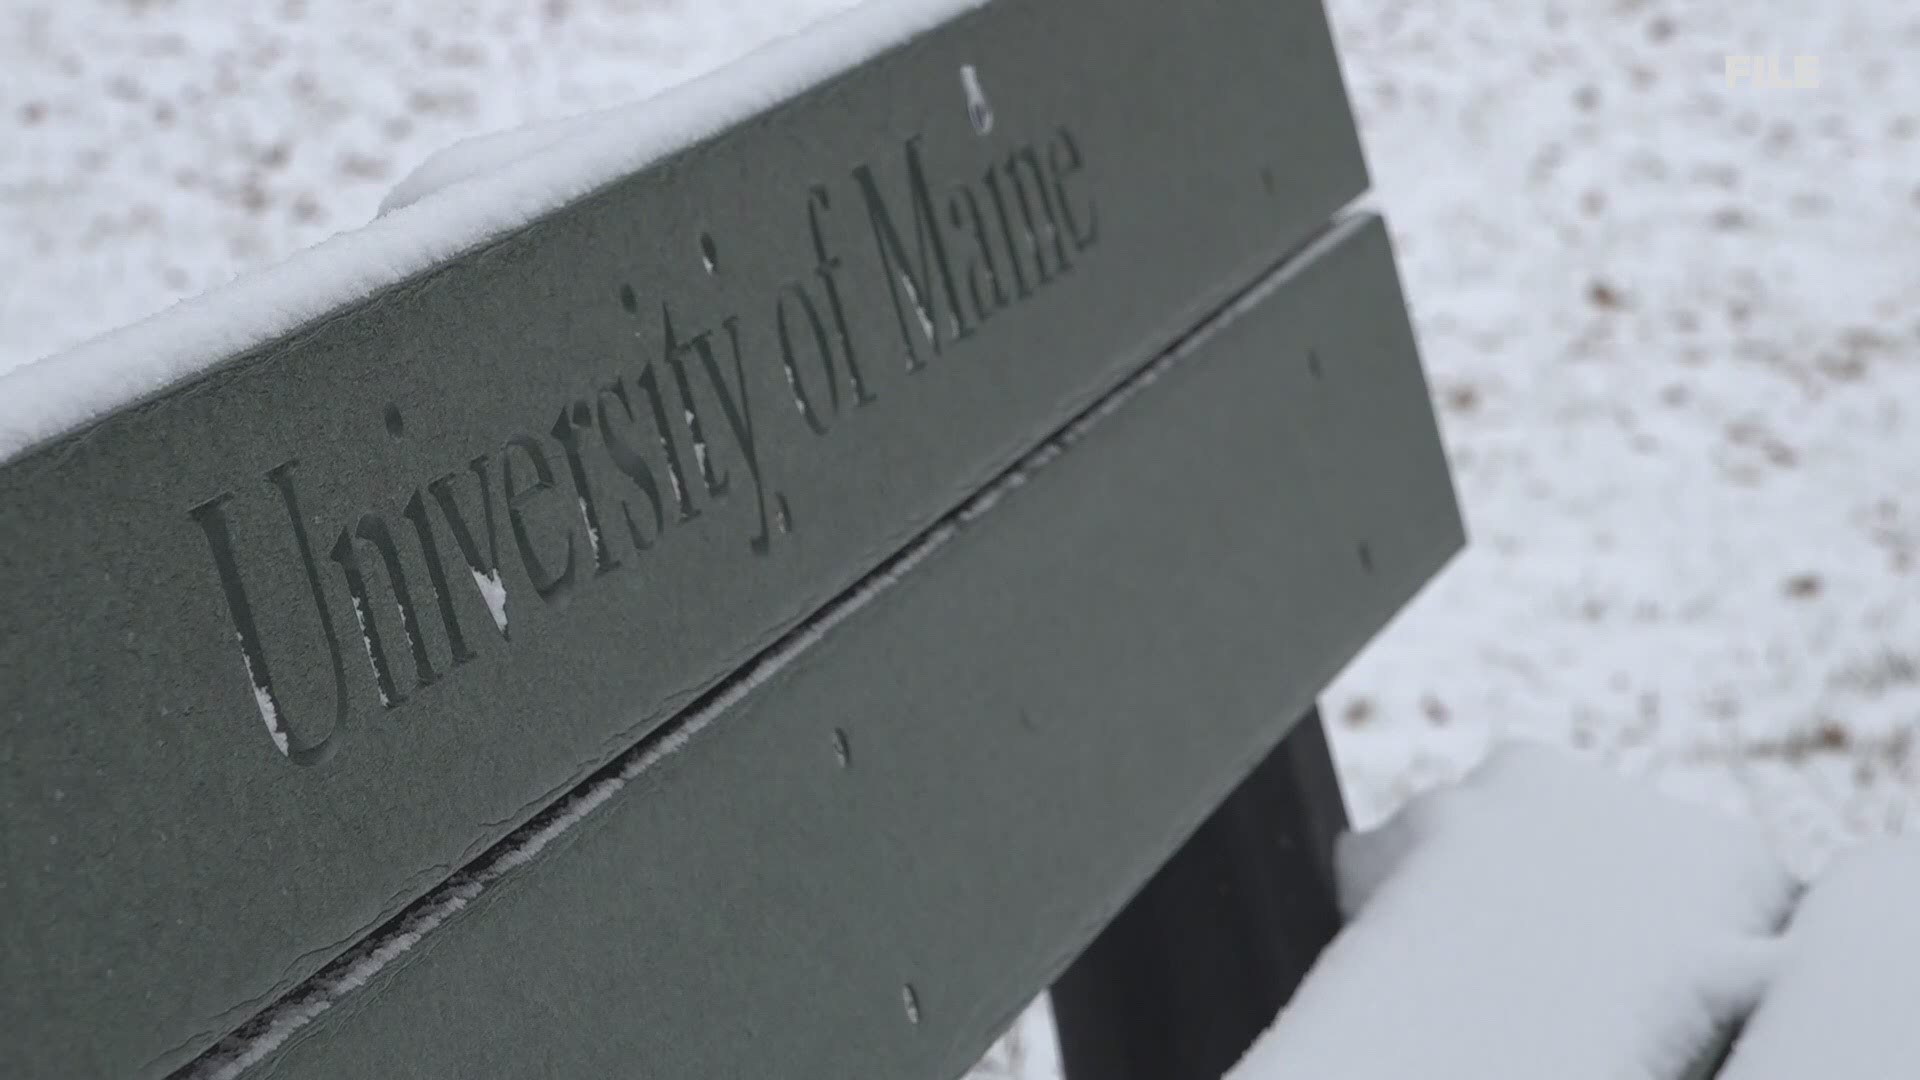 The university of Maine says its athletic teams will not be competing on the road or on campus until at least early February.